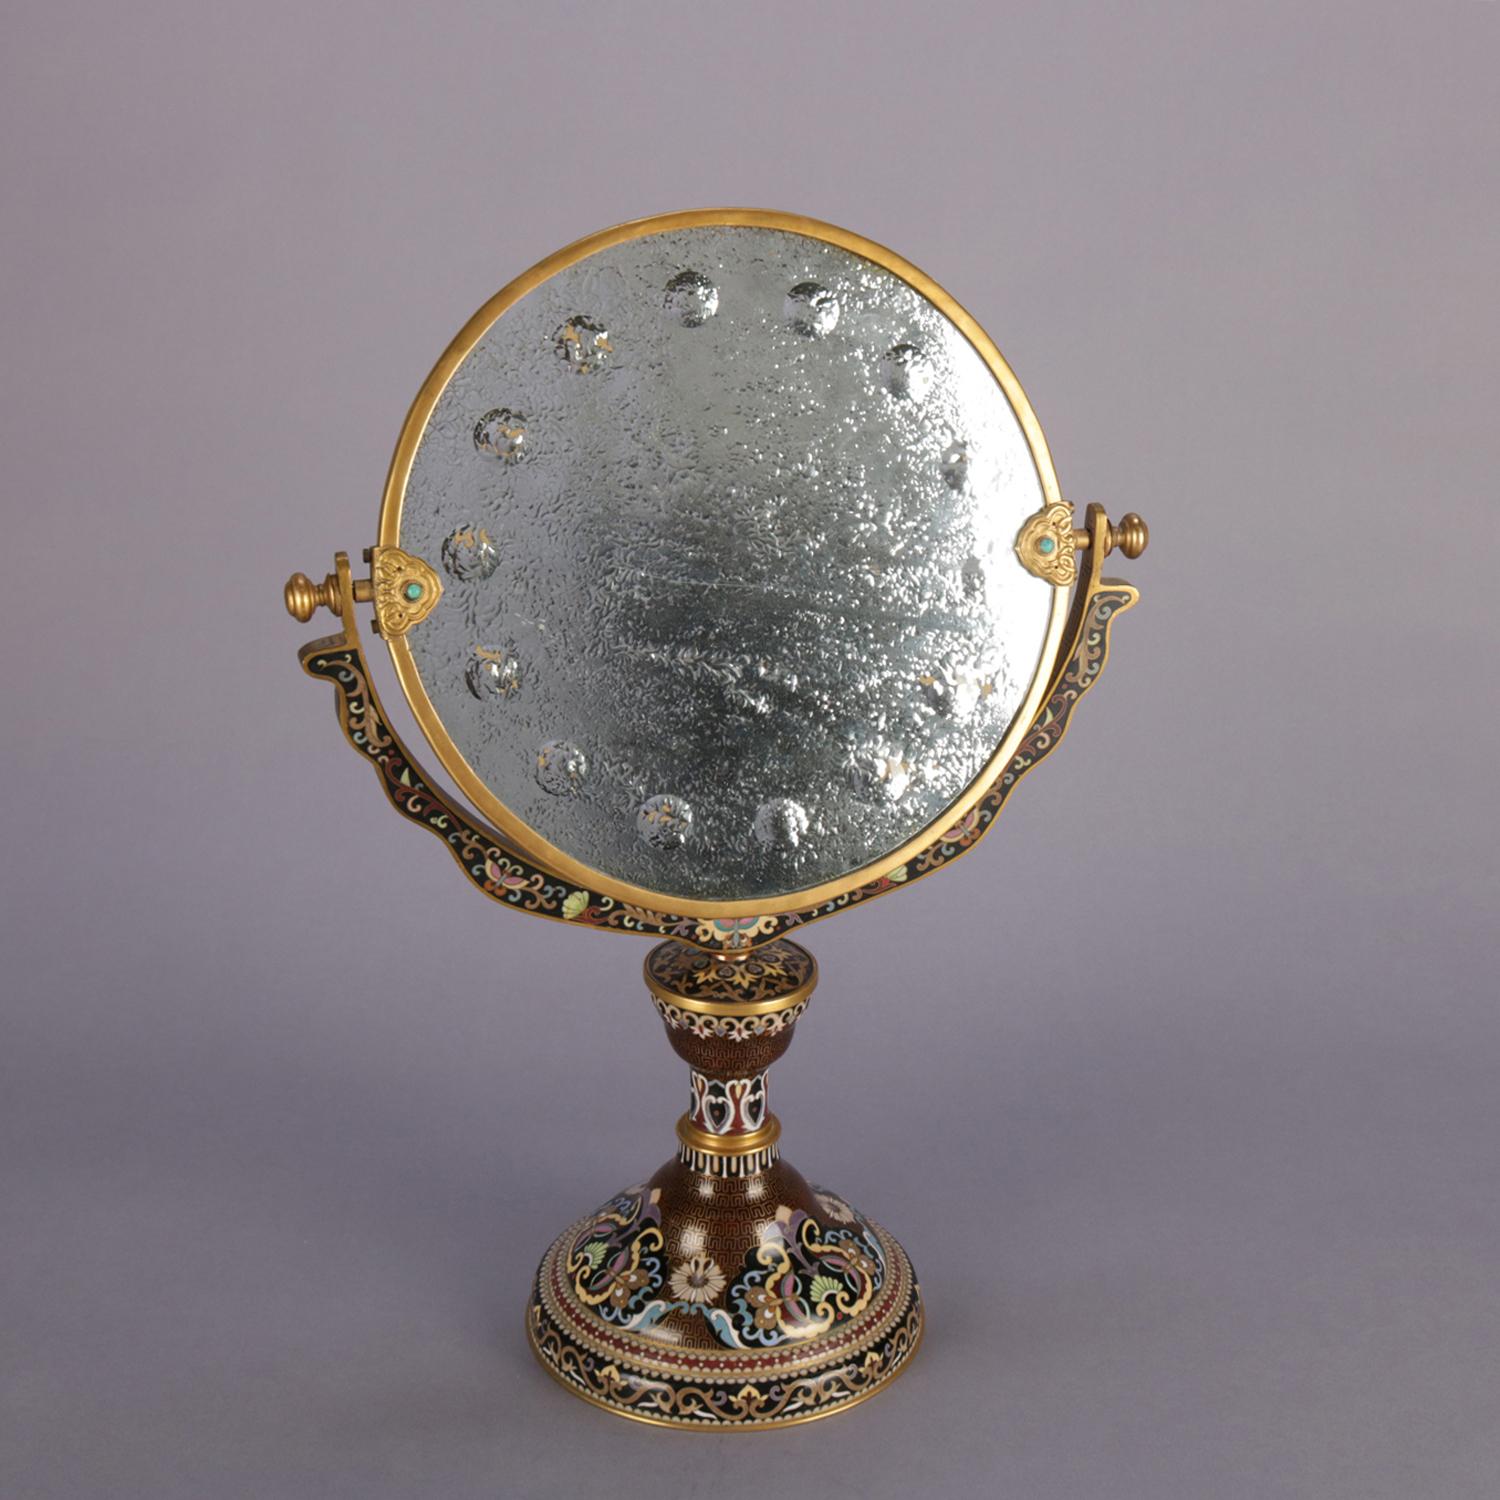 Antique Chinese vanity mirror features cloisonné enameled base with scroll, foliate and floral decoration, mirror with etched bamboo and cherry blossom decoration, 19th century

Measures: 18.25